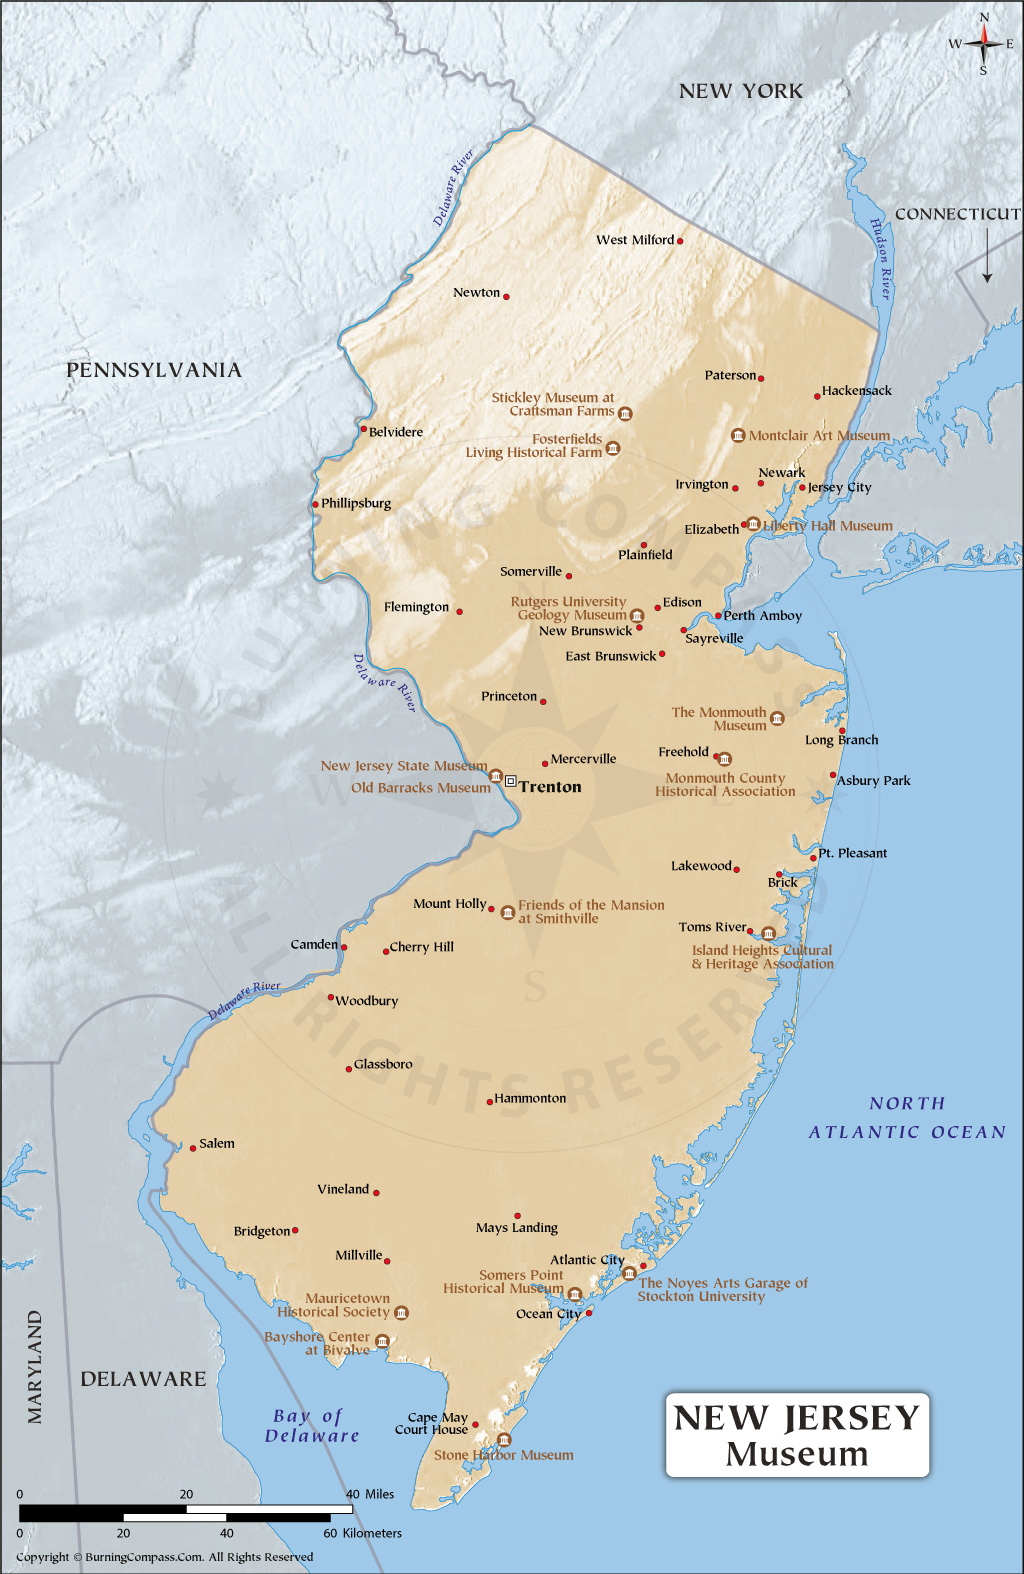 Museums in New Jersey Map, New Jersey Museums